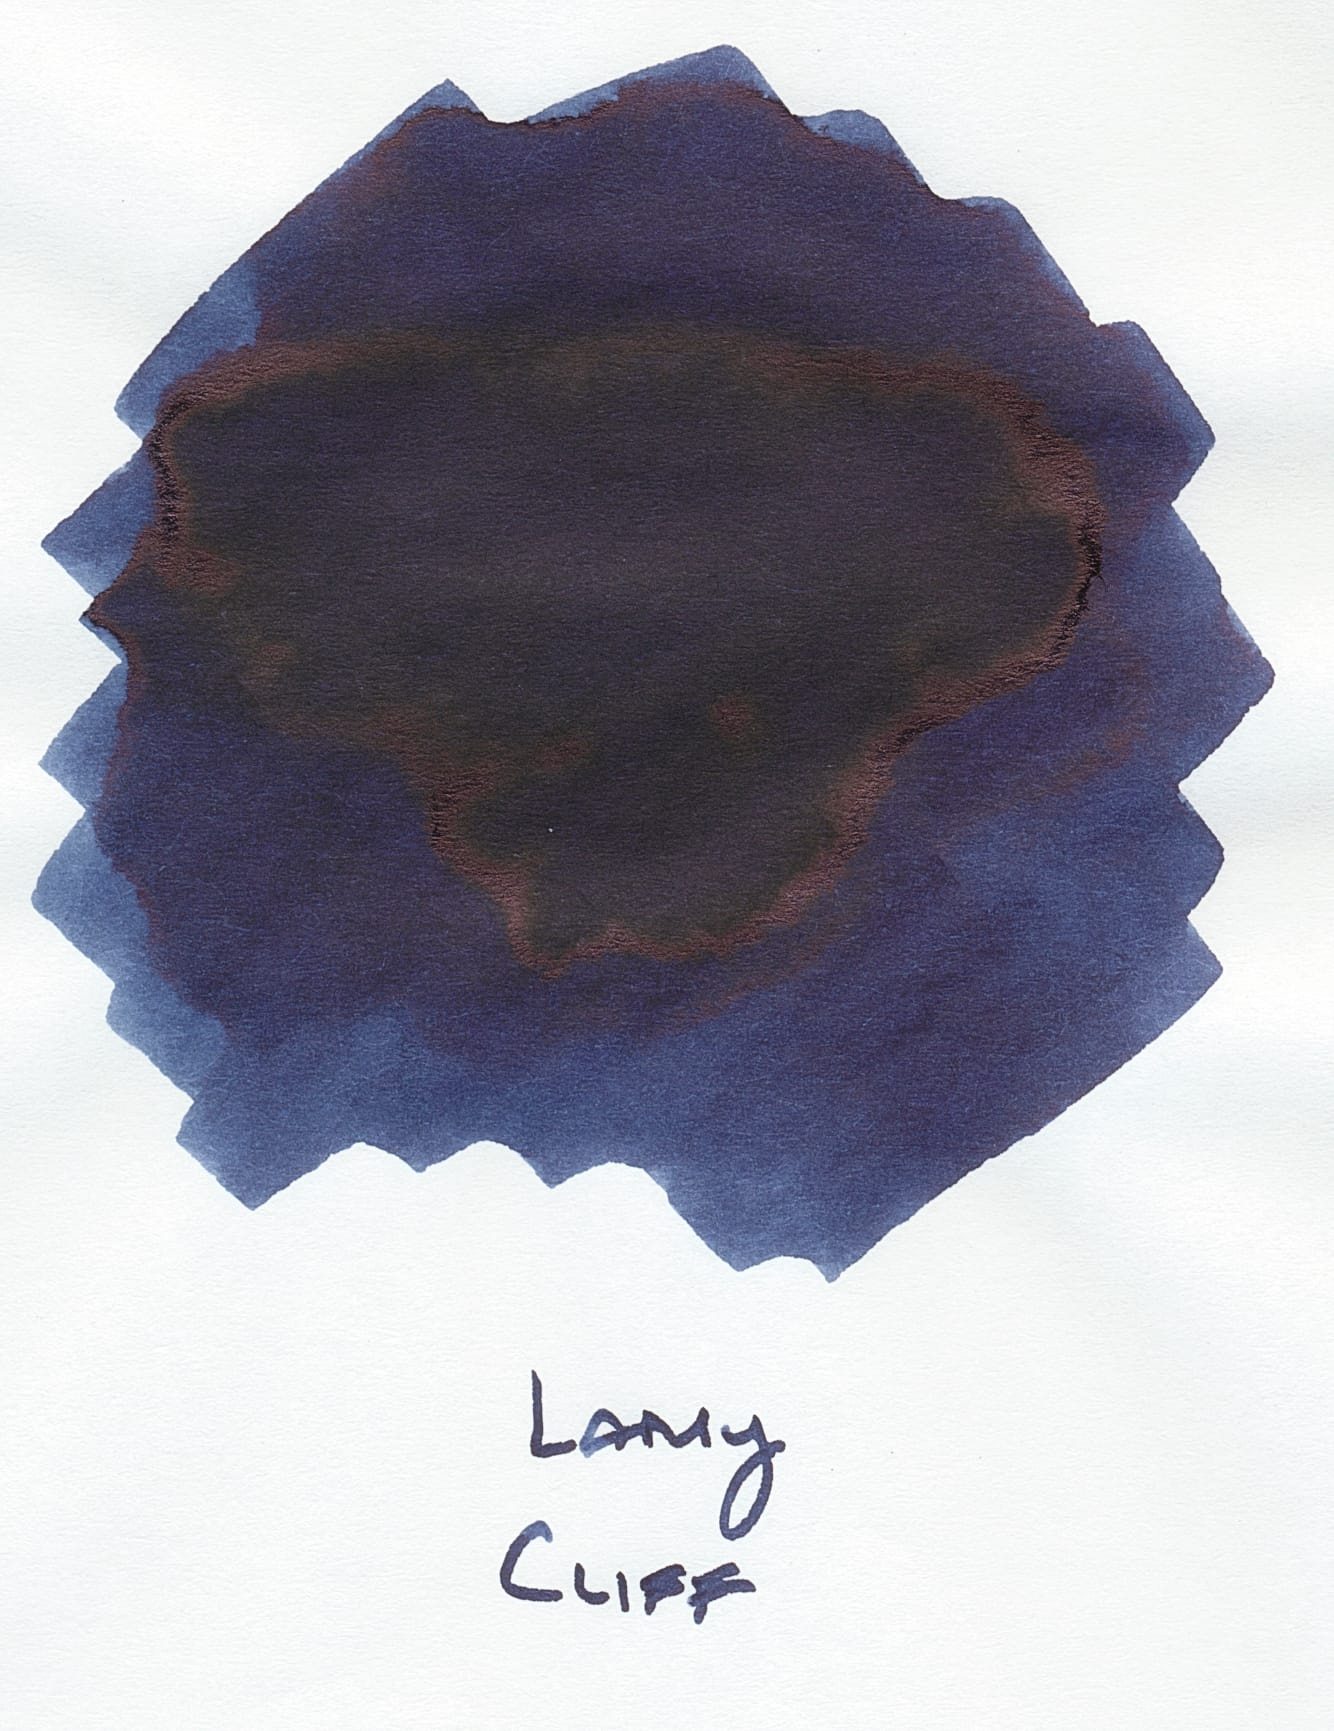 A scan of an ink swatch for a blue-black ink that also shows sheening where the ink is heavily applied, Lamy Cliff